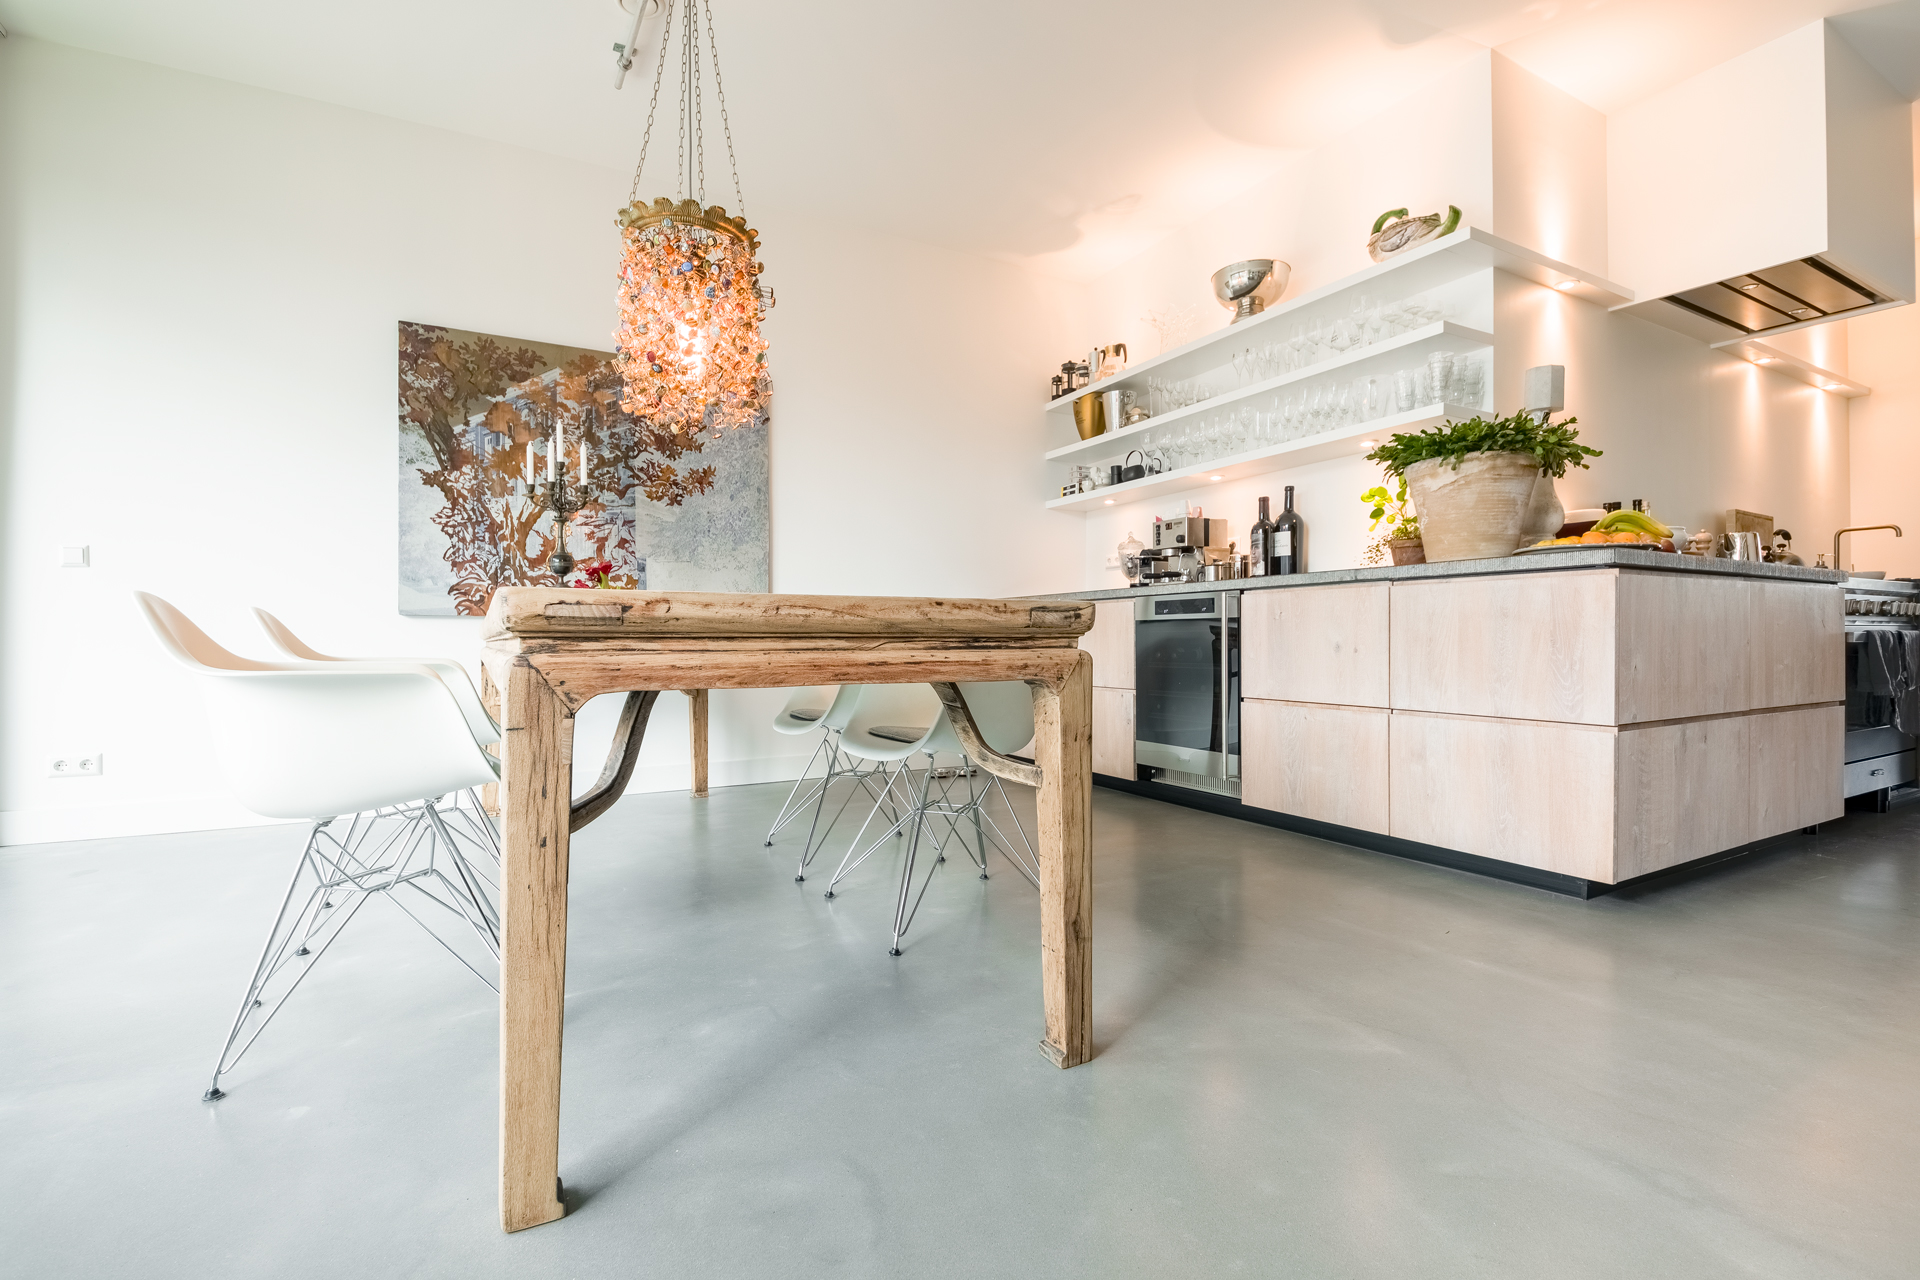  : Concrete floors at home 